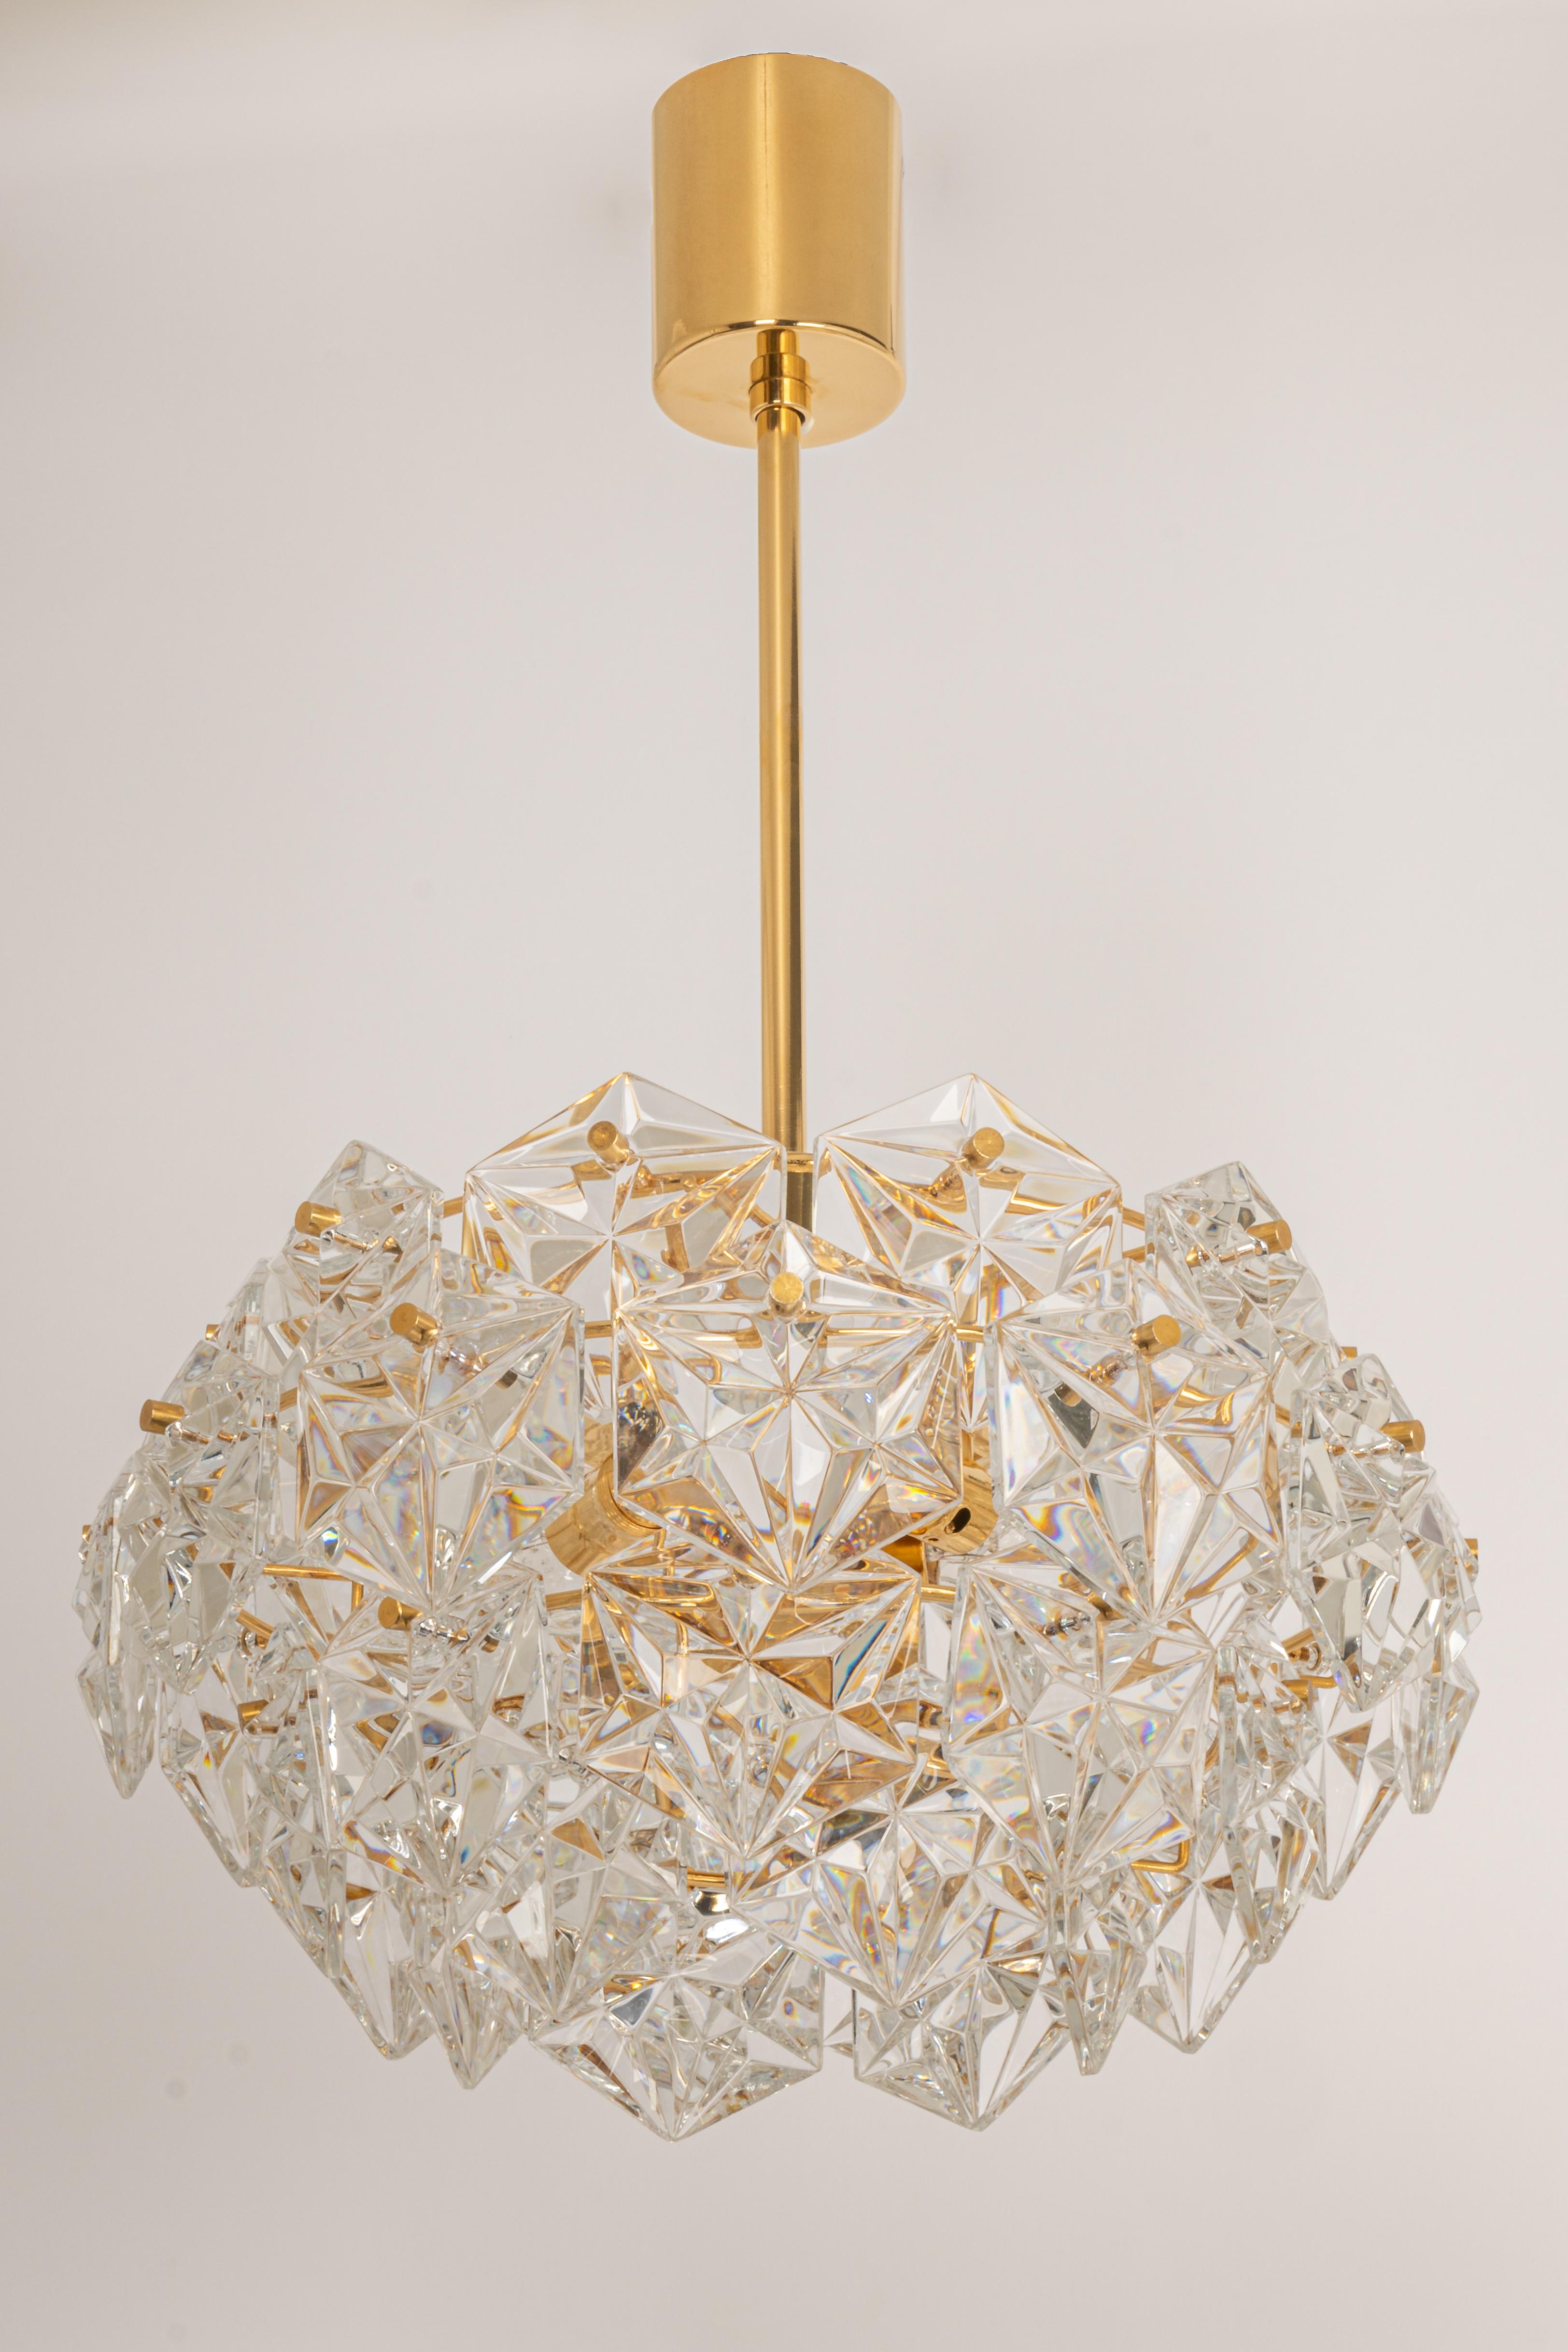 Late 20th Century 1 of 2 Petite Chandeliers, Brass and Crystal Glass by Kinkeldey, Germany, 1970s For Sale